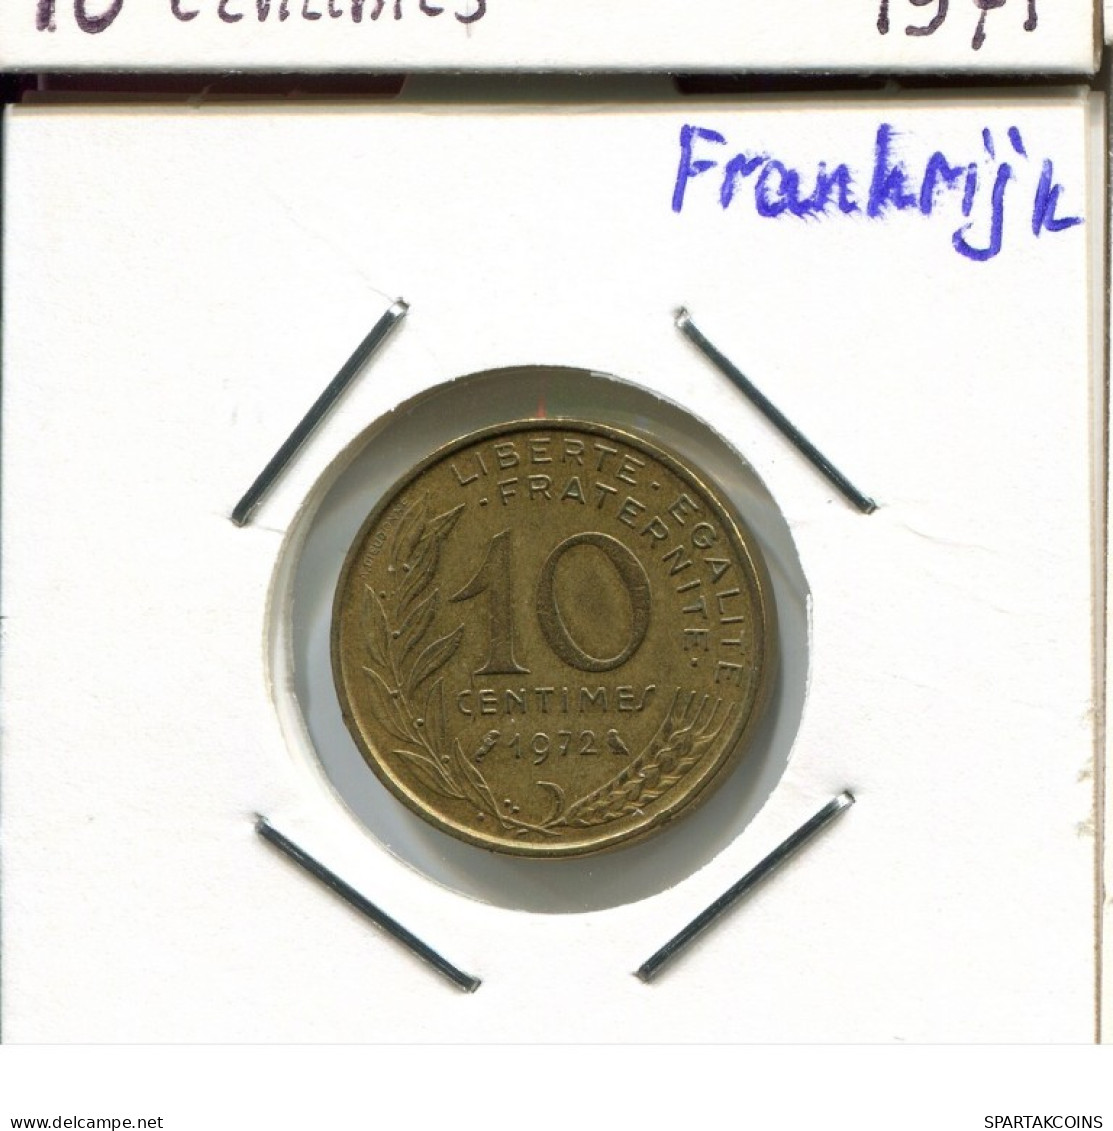 10 CENTIMES 1972 FRANCE Coin French Coin #AM126.U.A - 10 Centimes